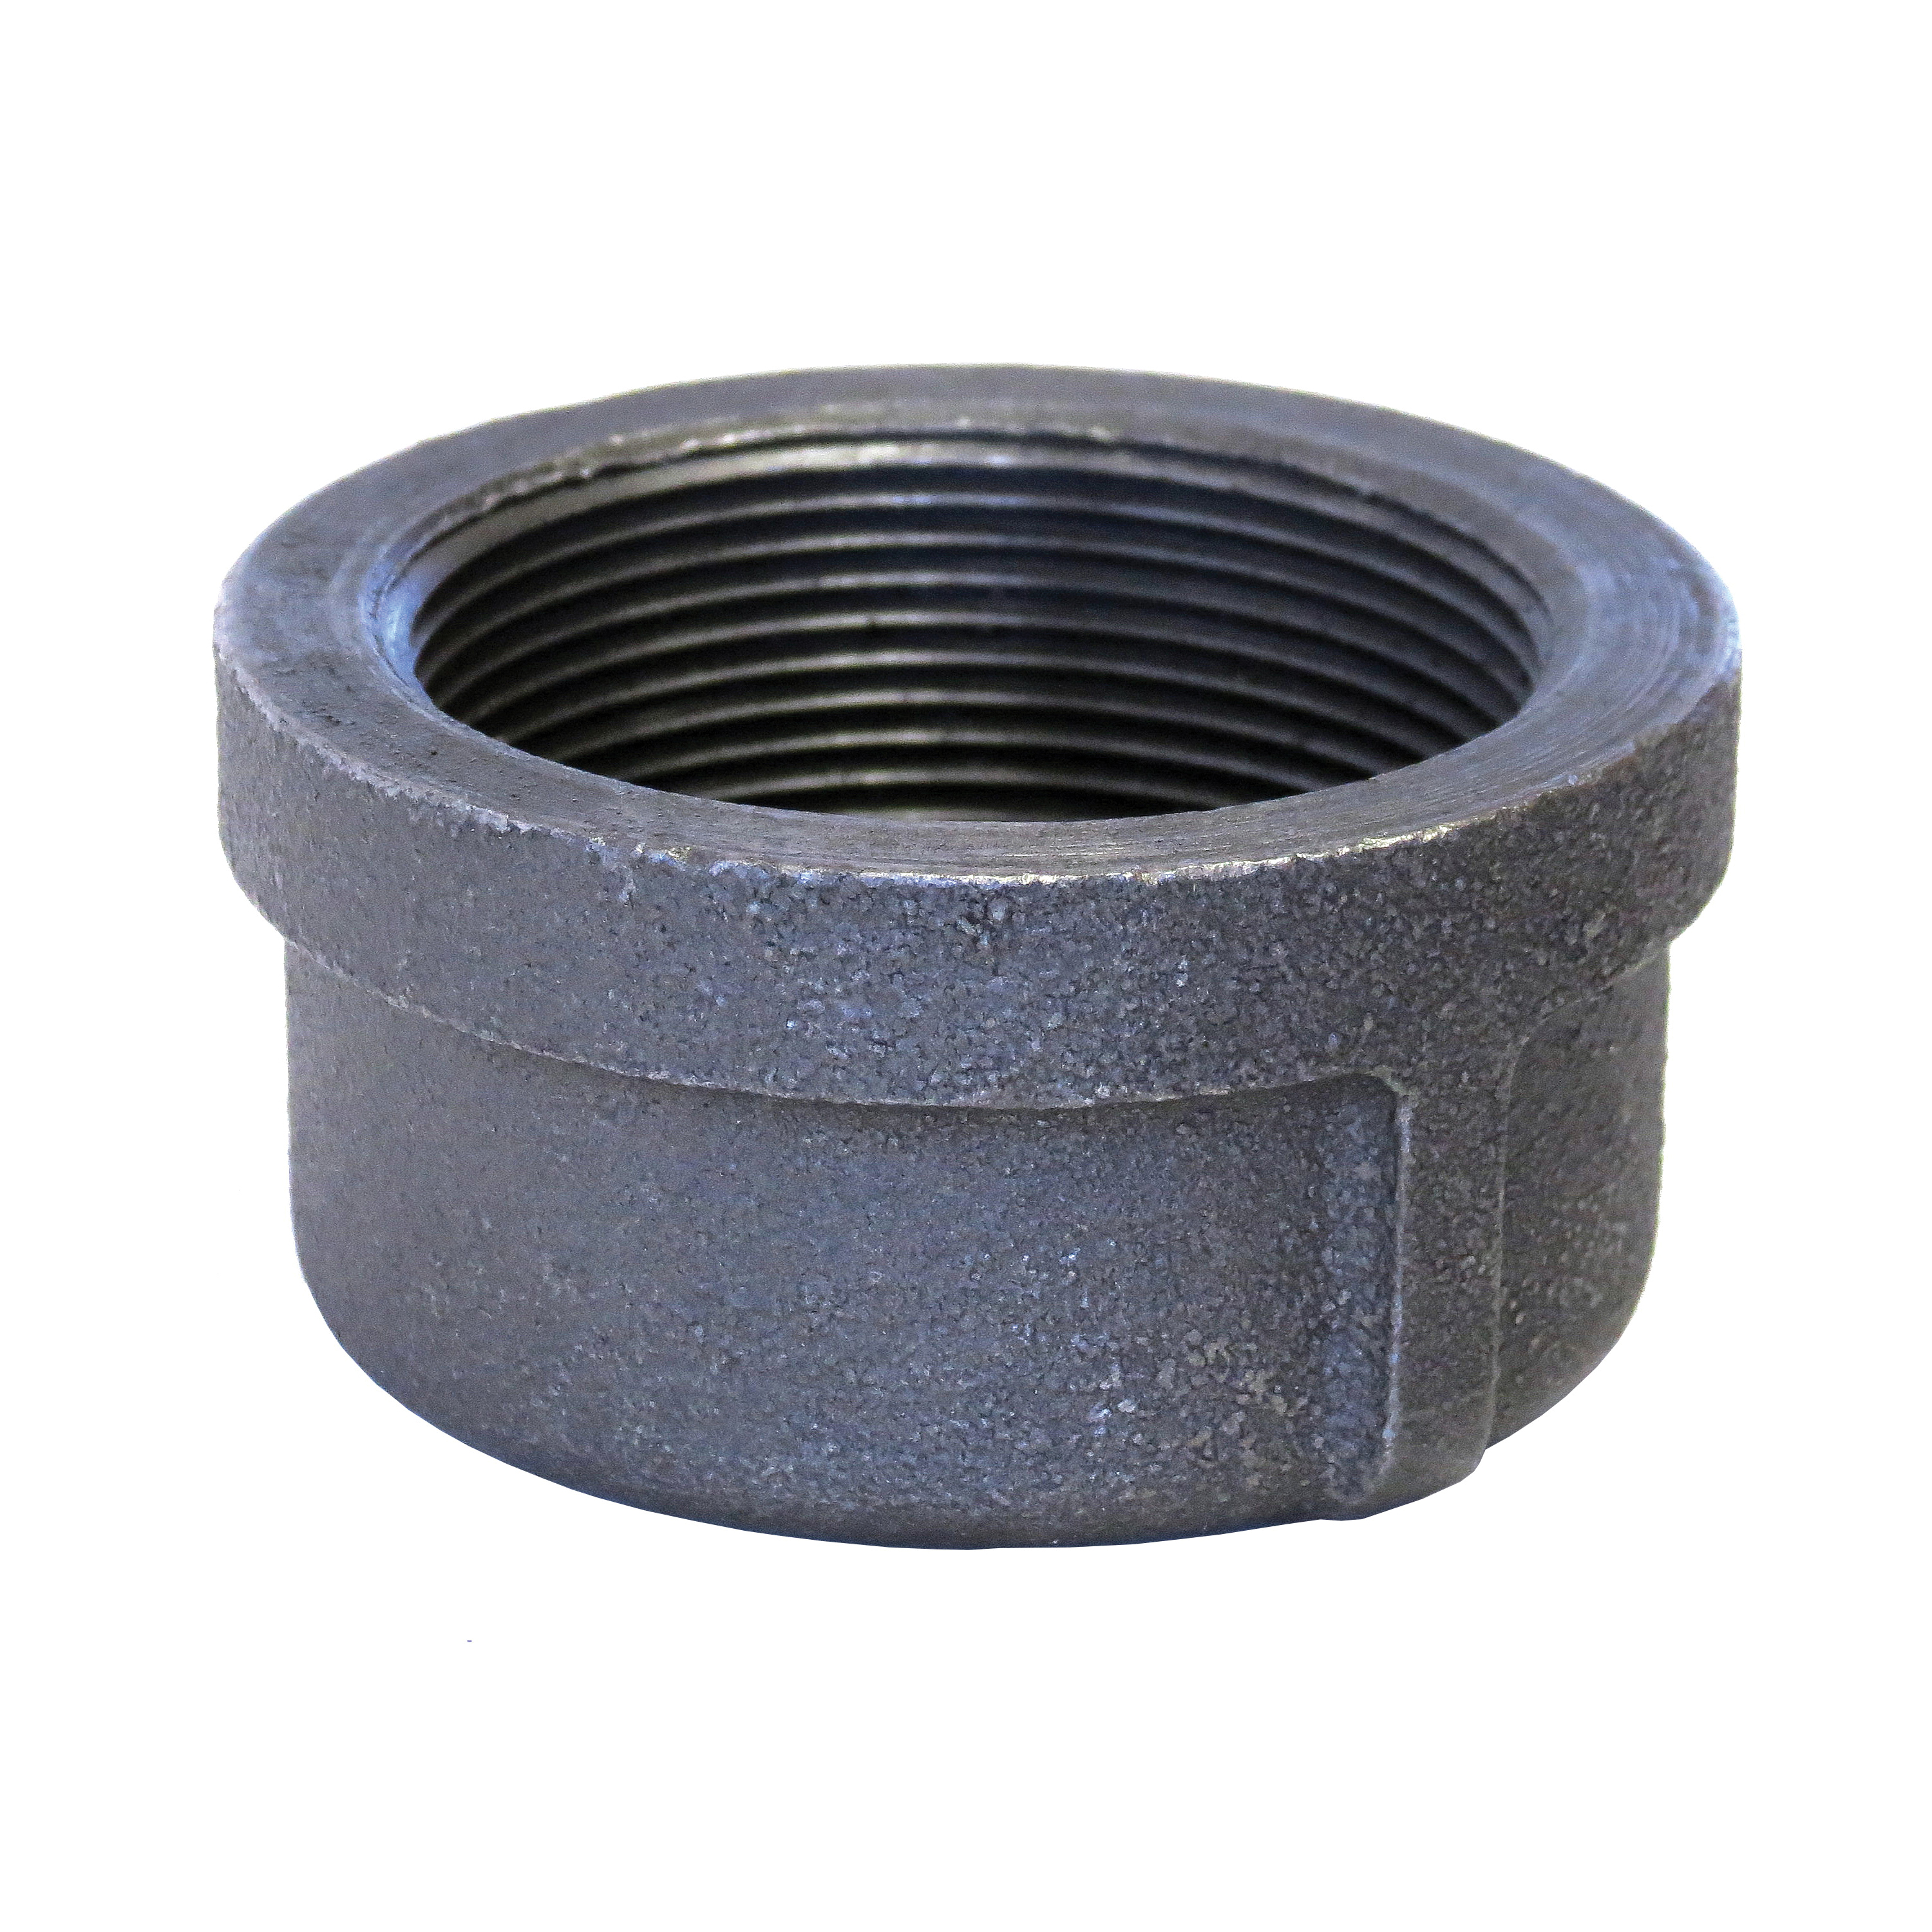 SPF/Anvil™ 0819900572 FIG 3124 Pipe Cap, 3/4 in Nominal, FNPT End Style, 150 lb, Malleable Iron, Galvanized, Import